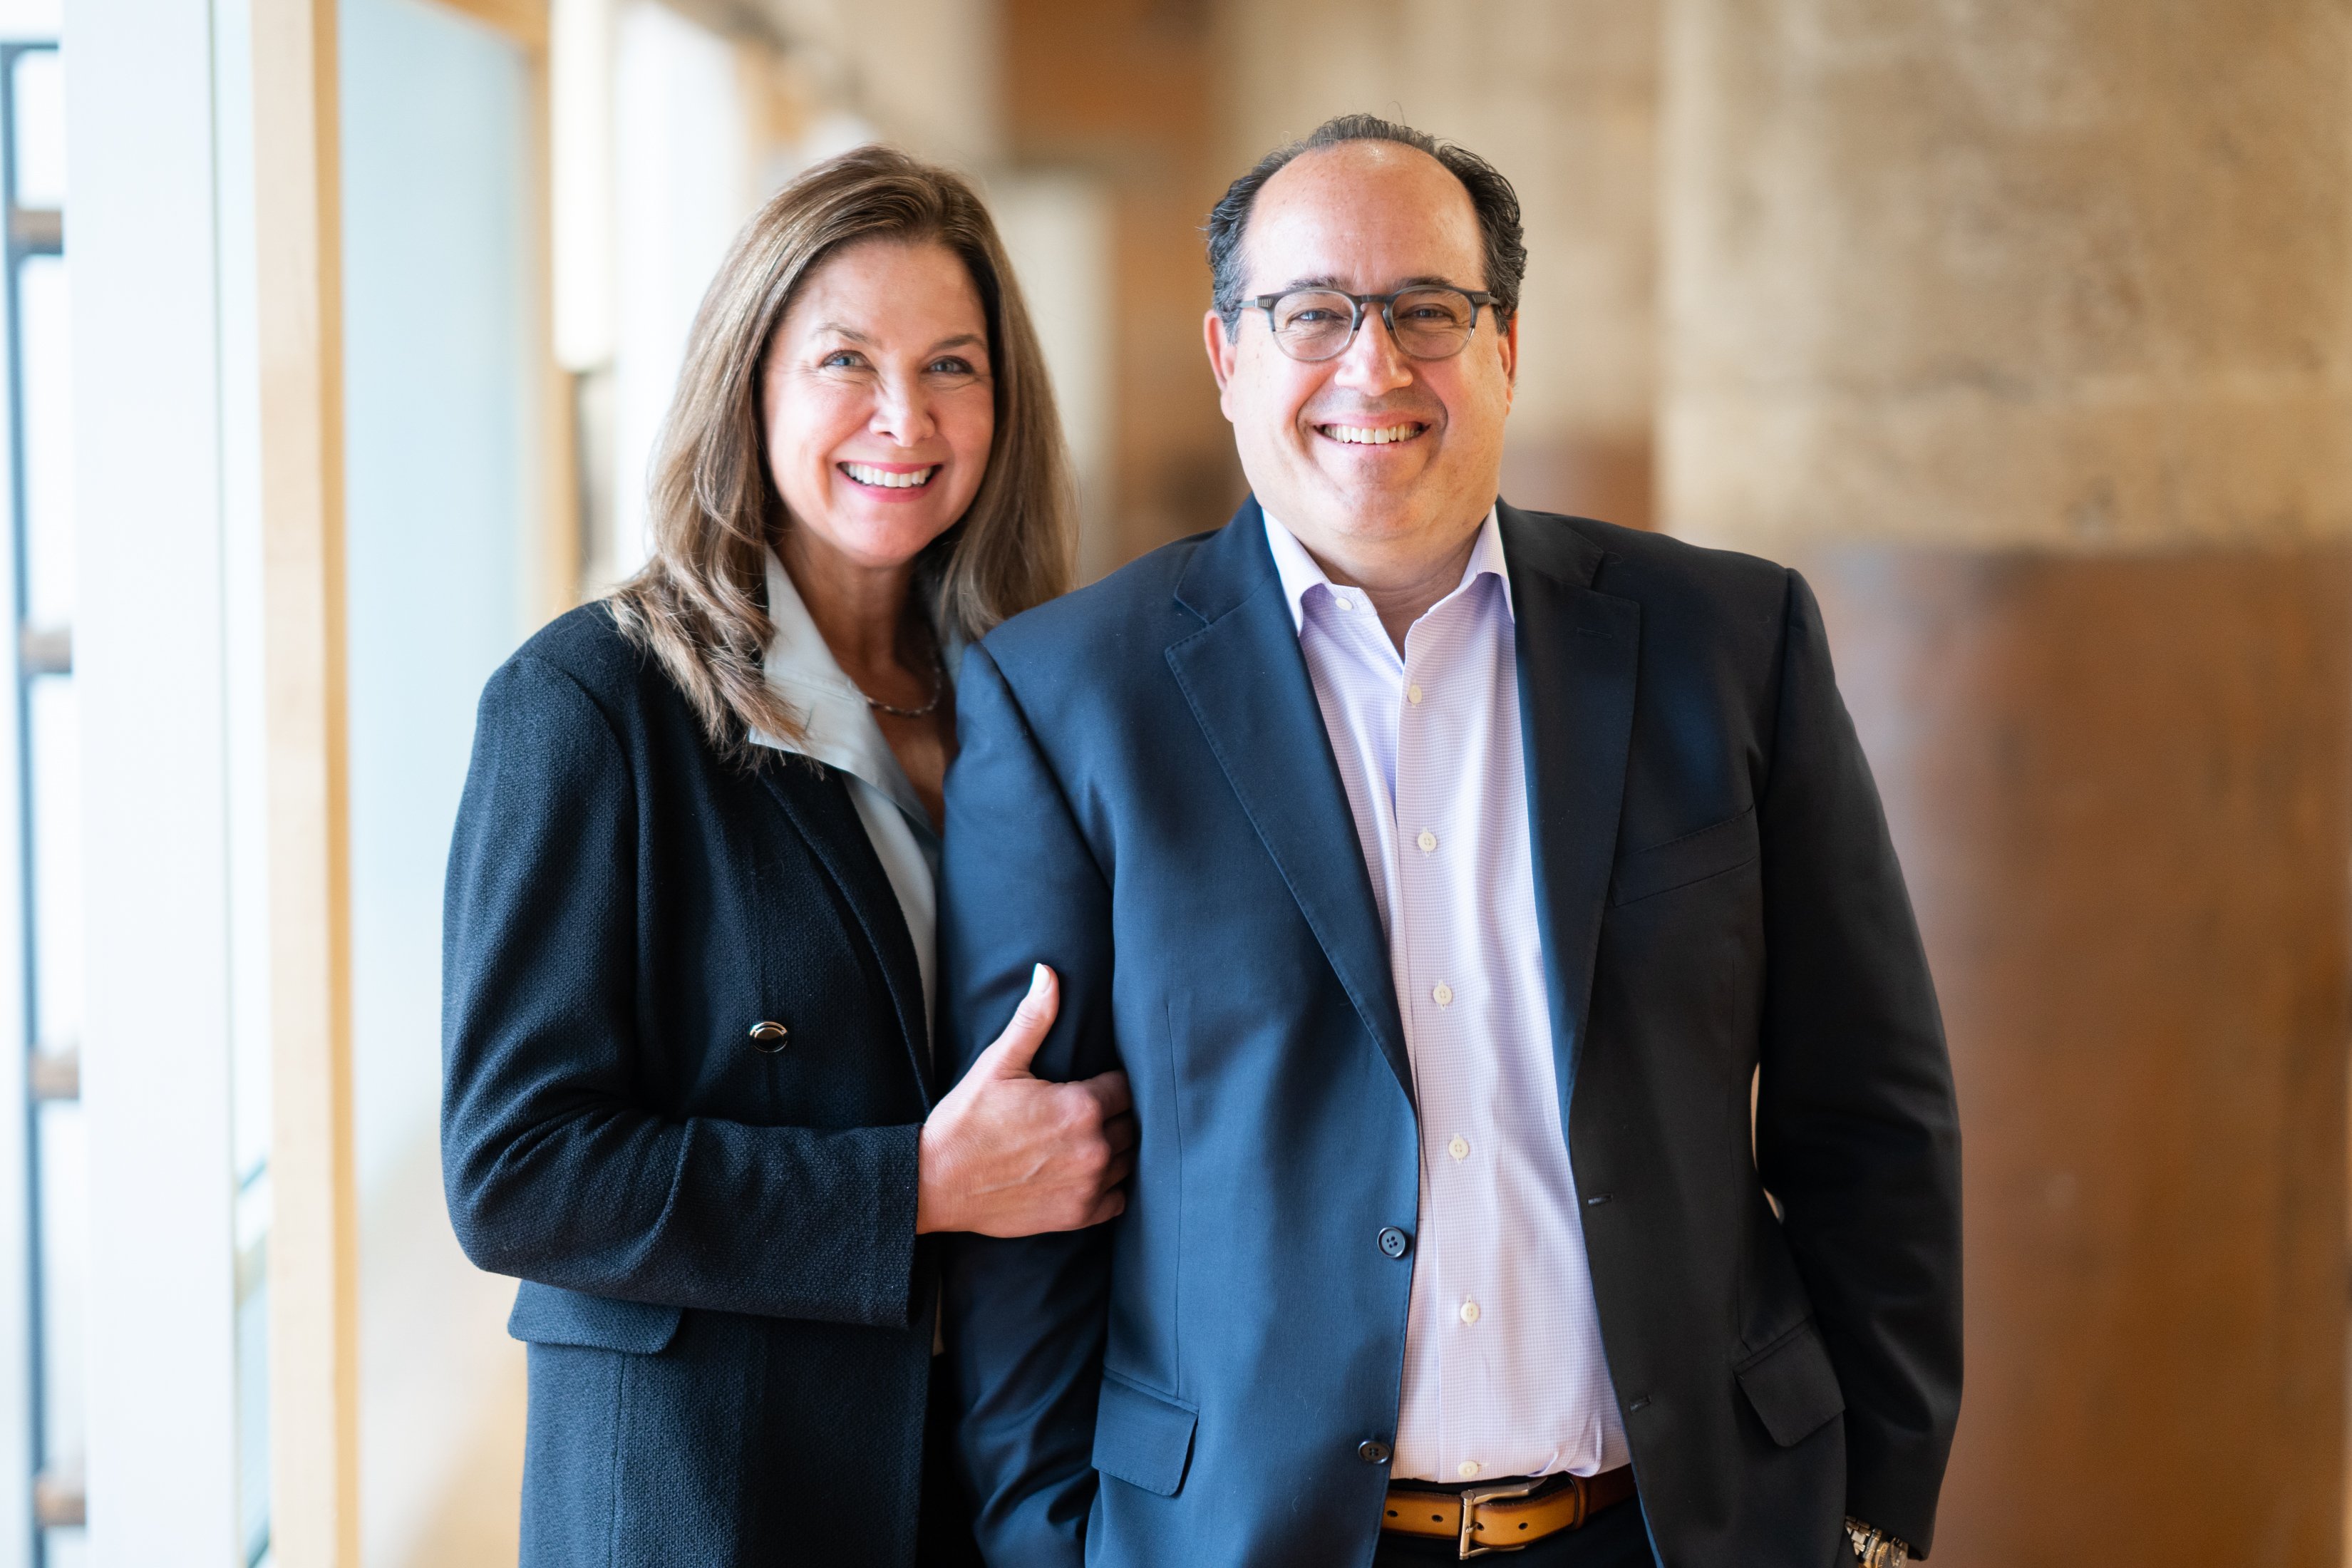 Catalyze Dallas Founders Named EY Entrepreneur Of The Year Finalists for 2022 | Catalyze Dallas